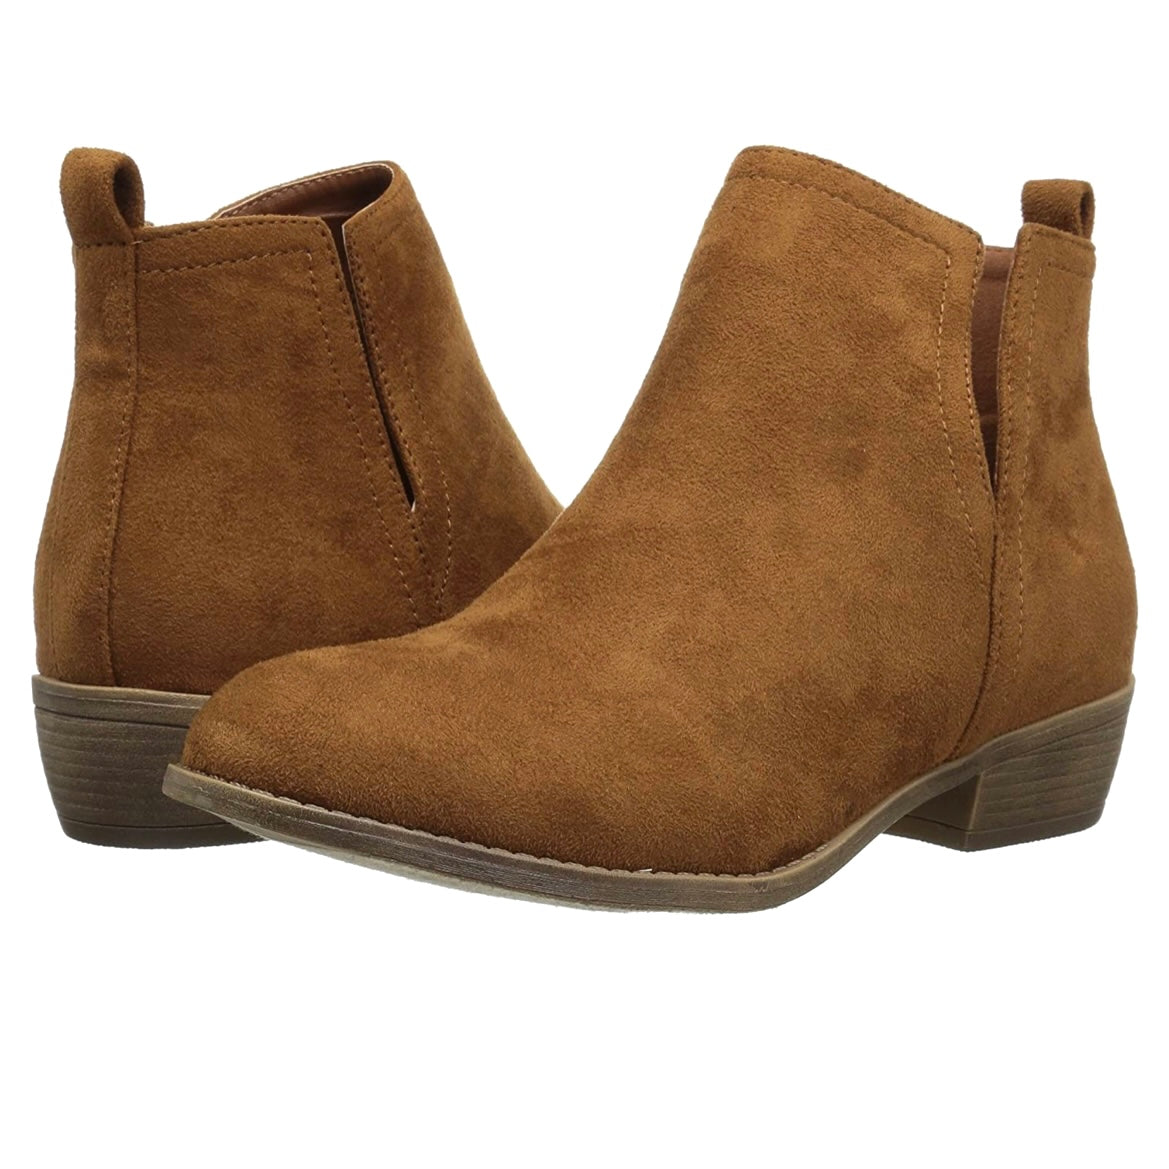 RIMI Camel Booties Women's Ankle Boots